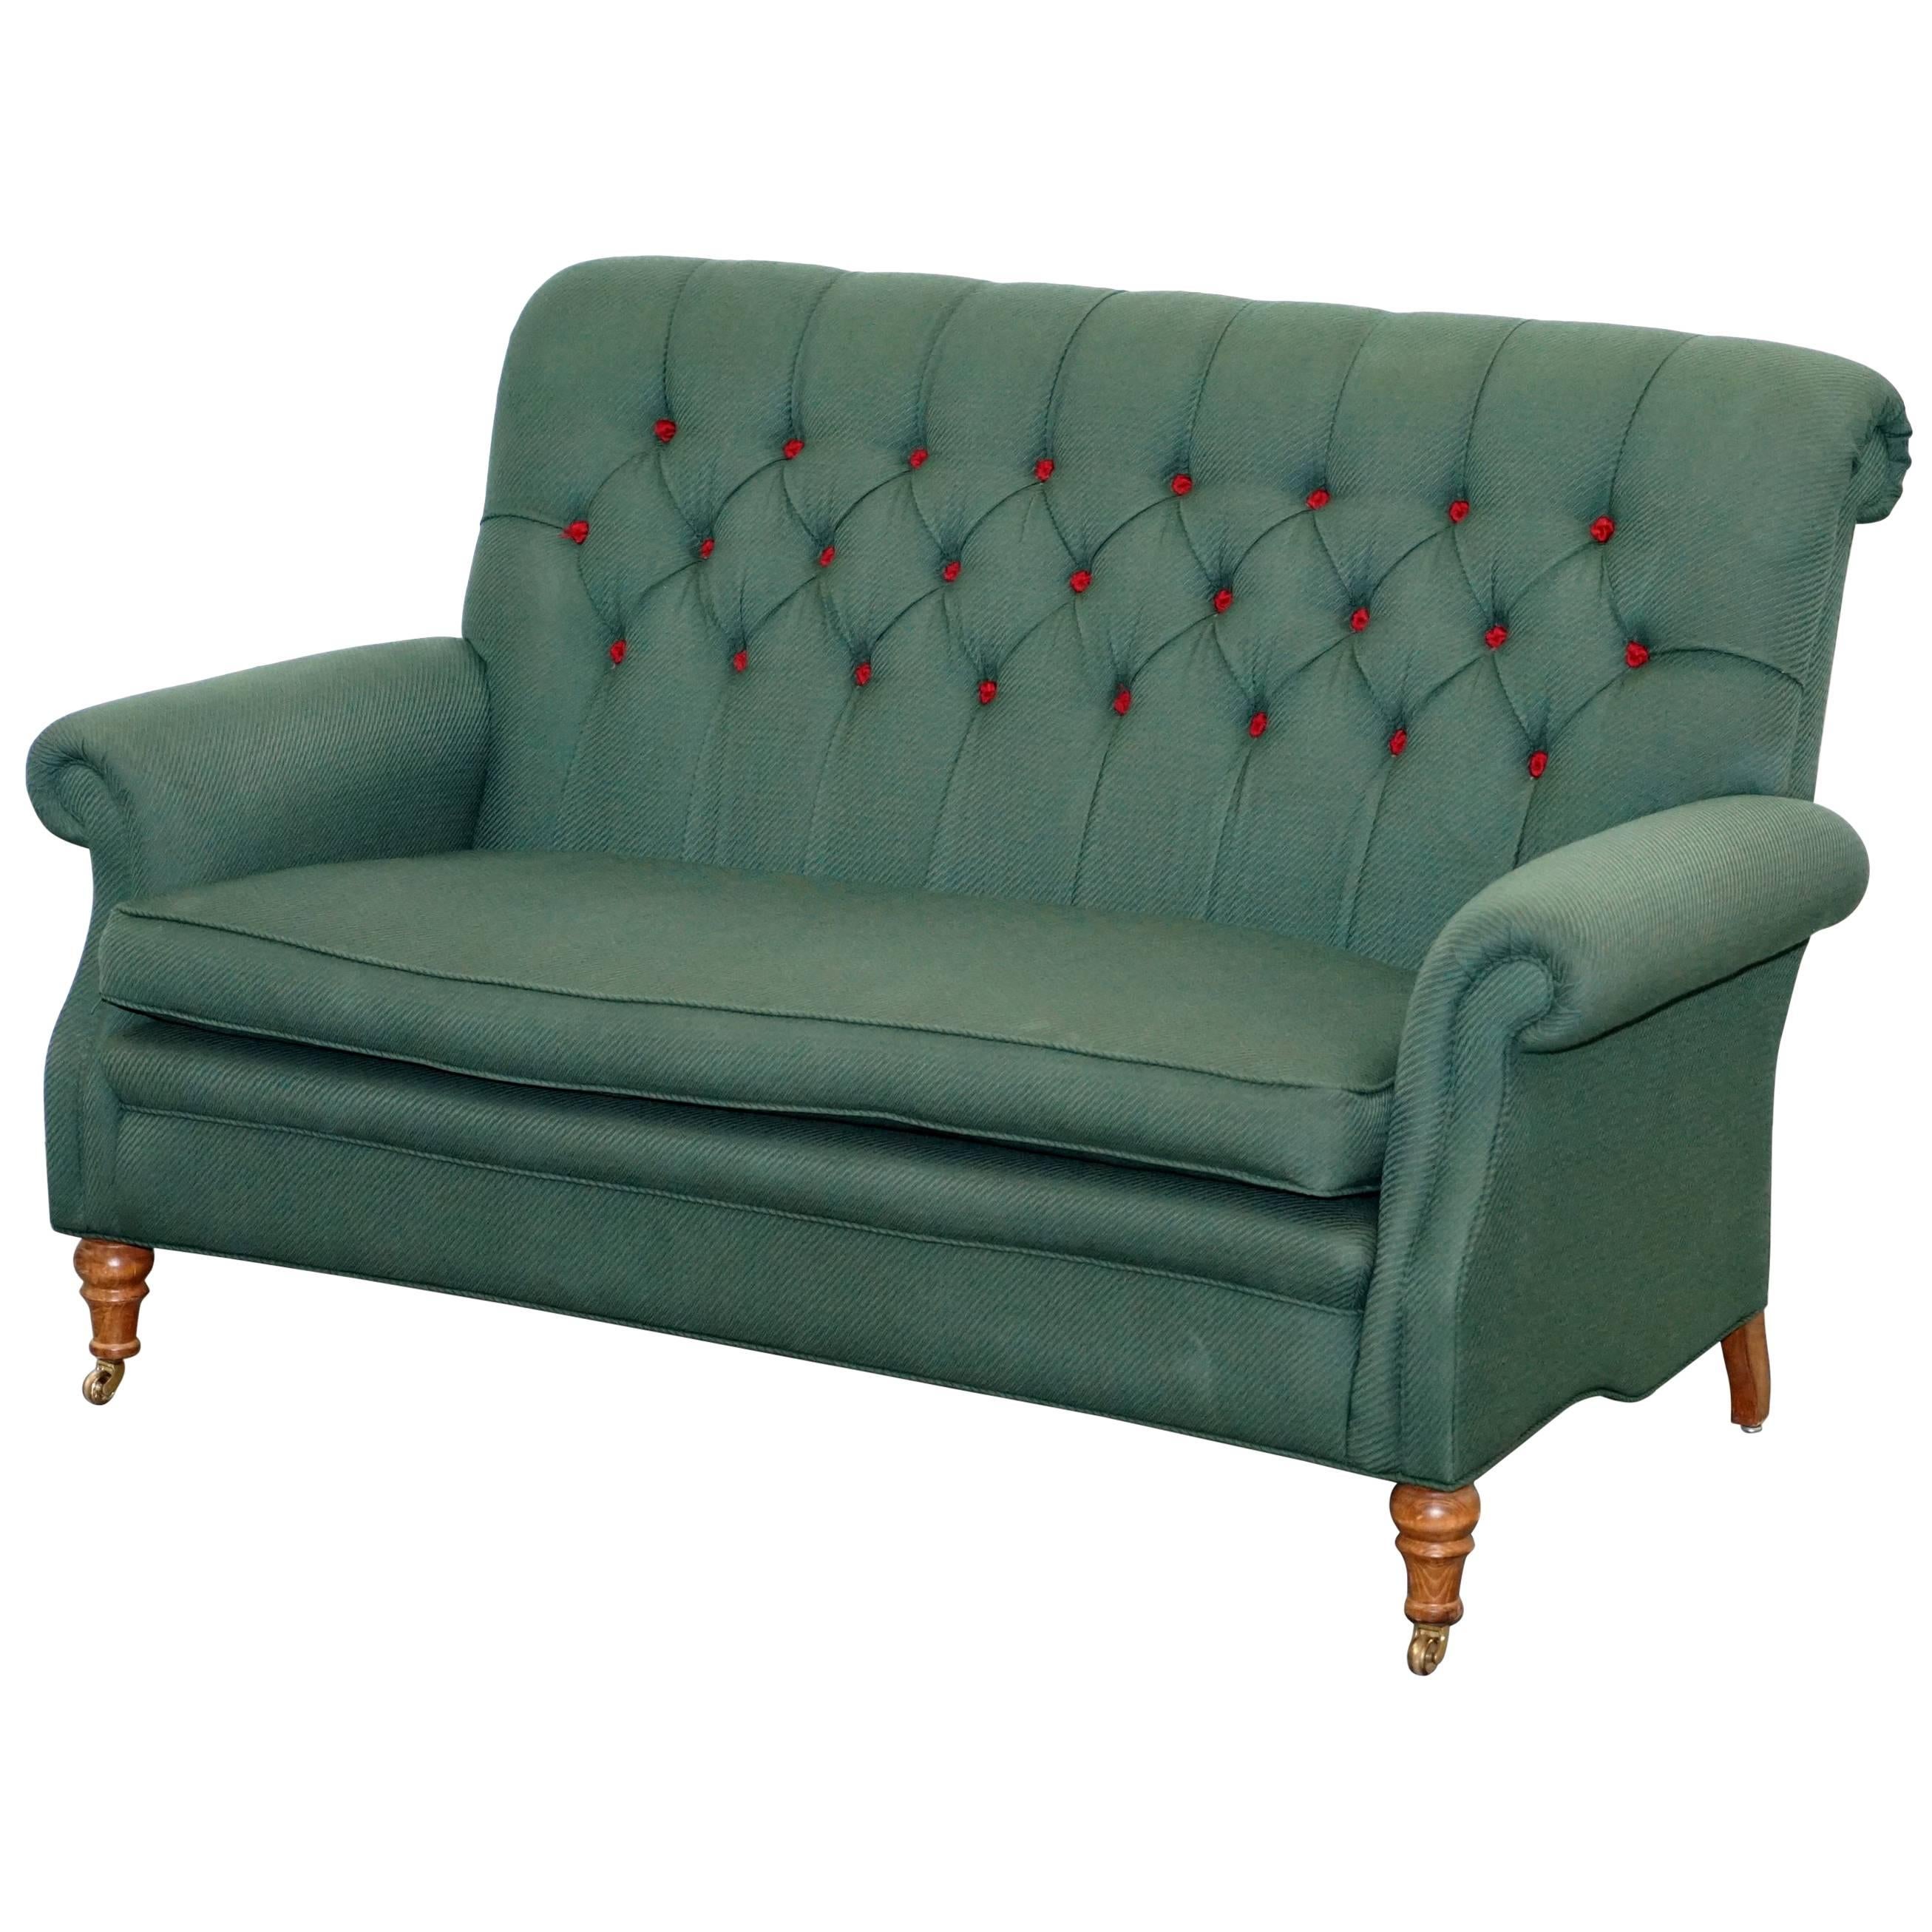 Wellington Model Howard Style Chesterfield Green Upholstery Two-Seat Bench Sofa